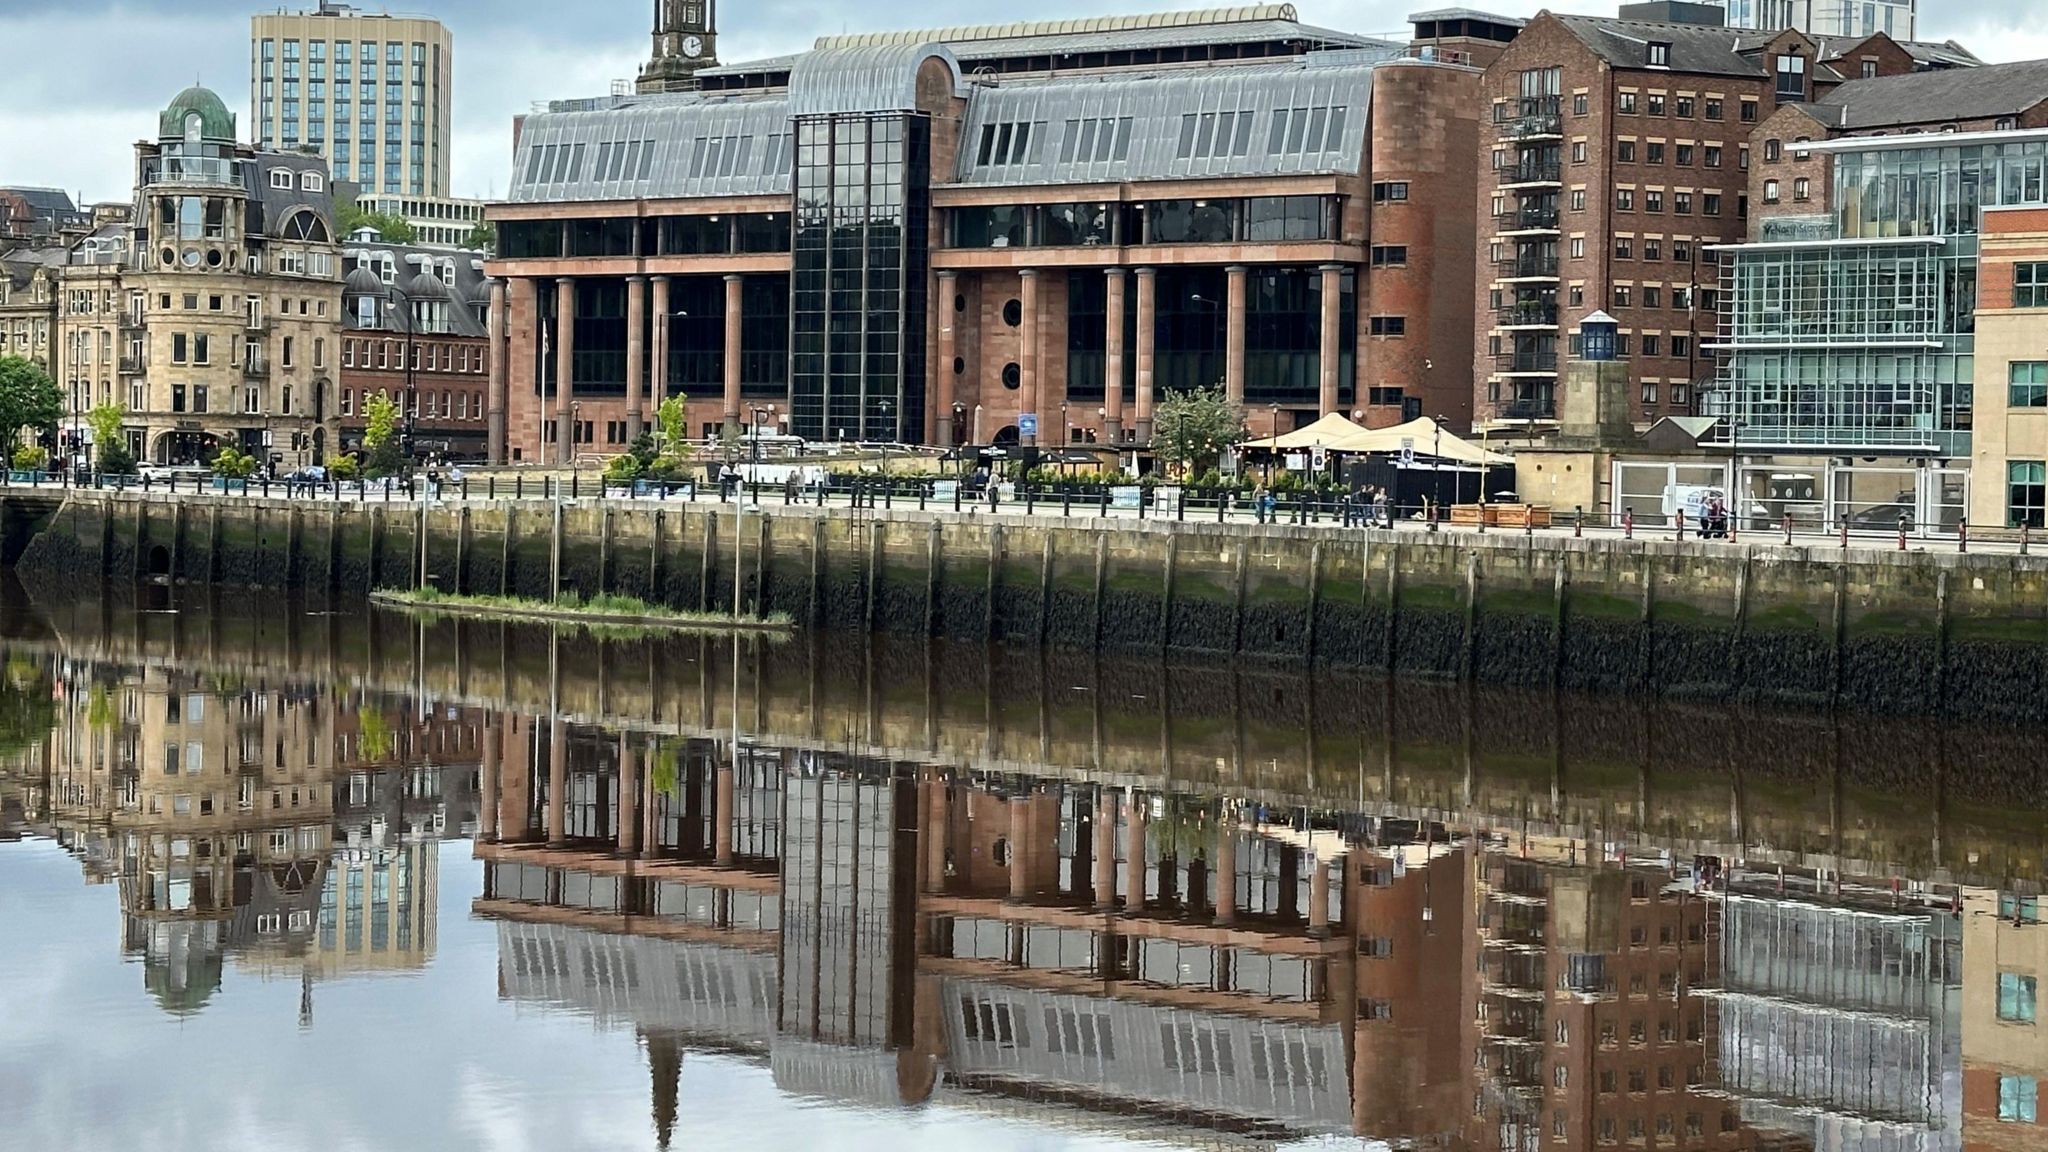 Court building reflected in river